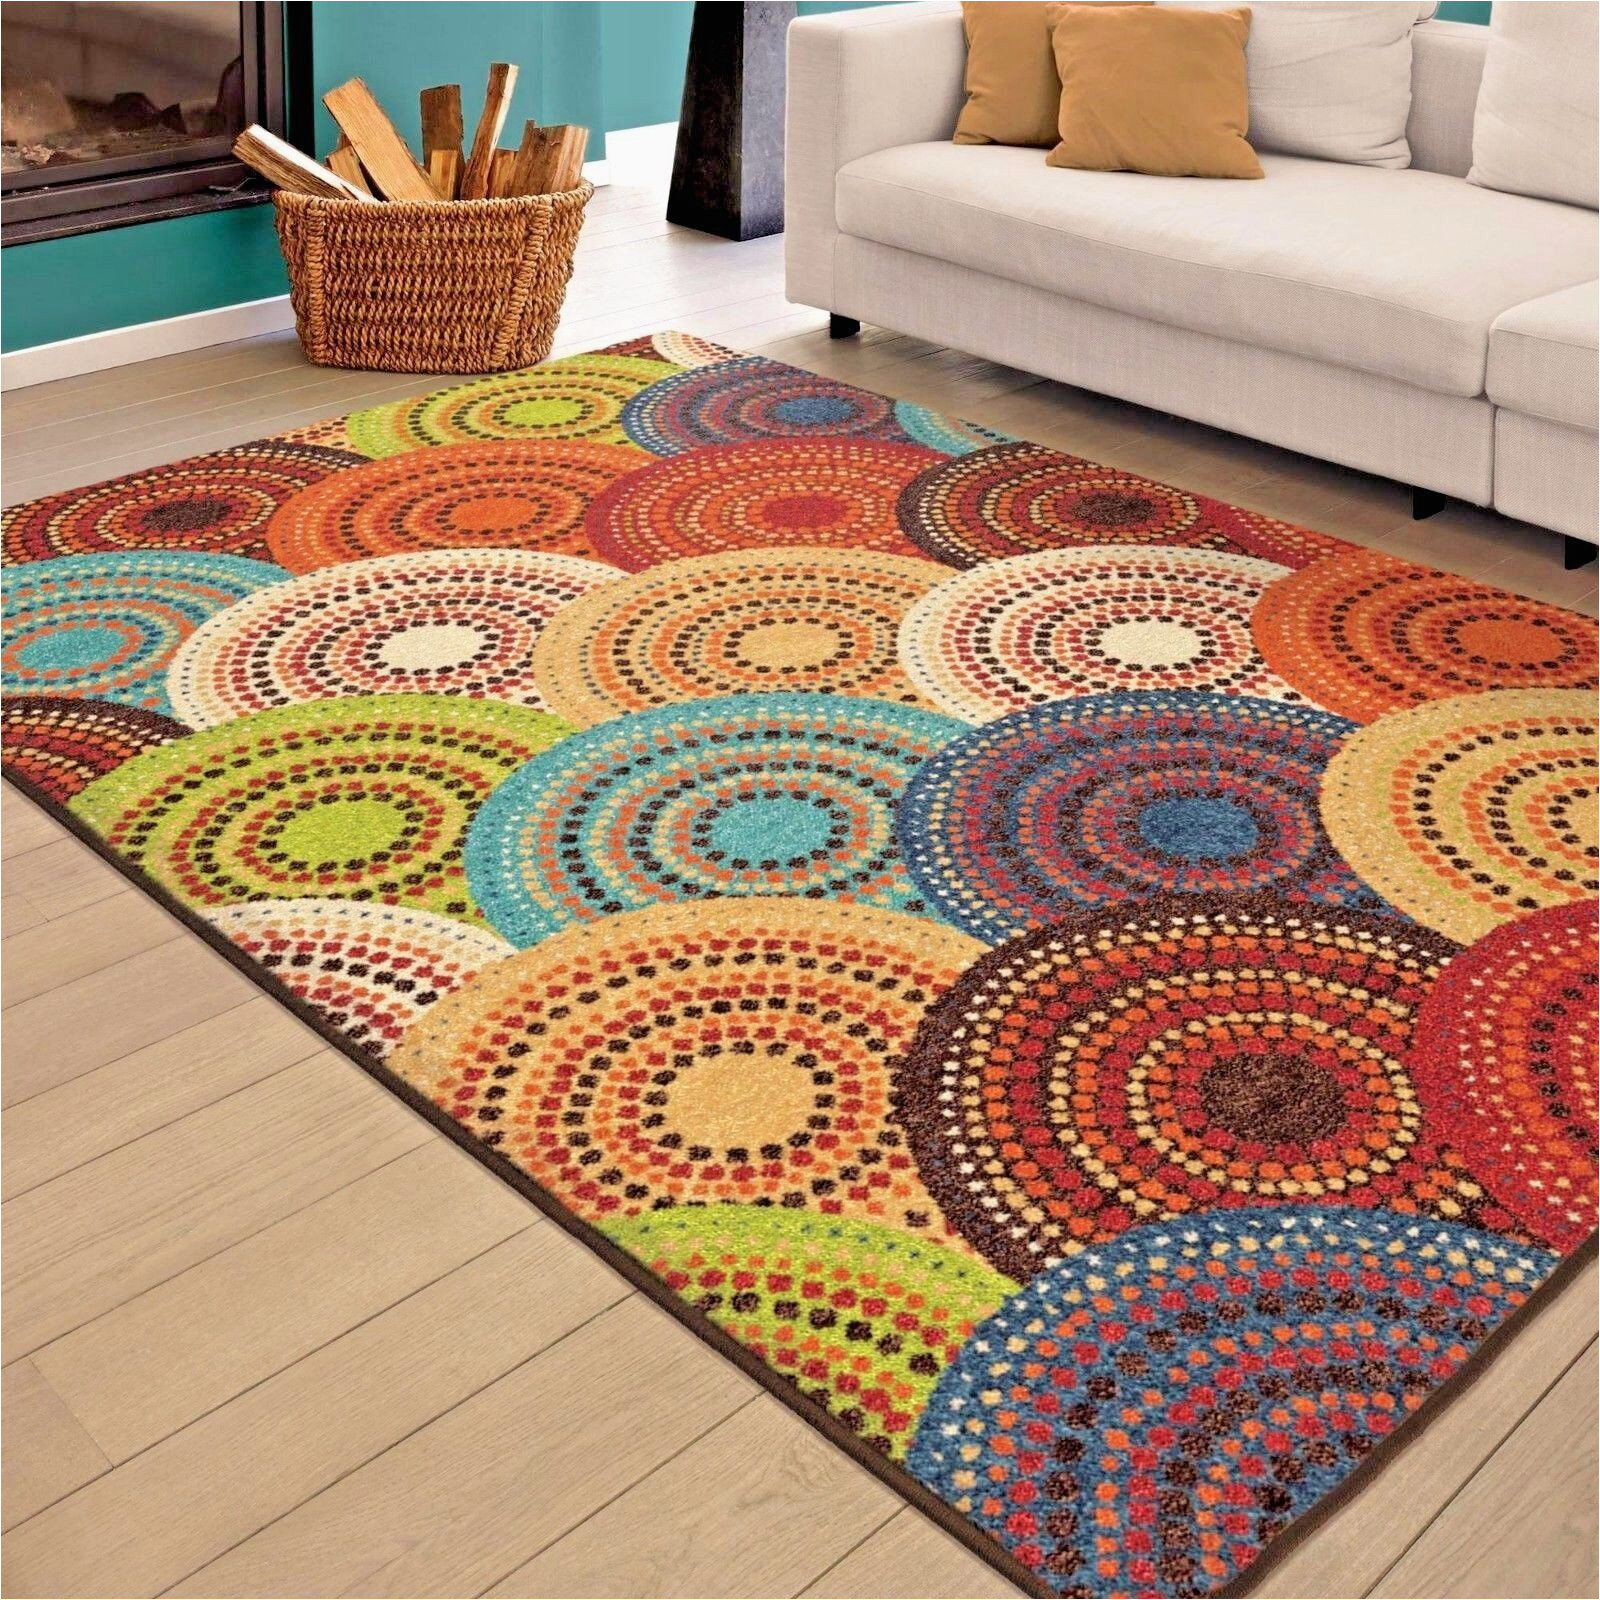 Area Rugs Larger Than 8×10 Rugs area Rugs Carpets 8×10 Rug Floor Modern Big Colorful Large …